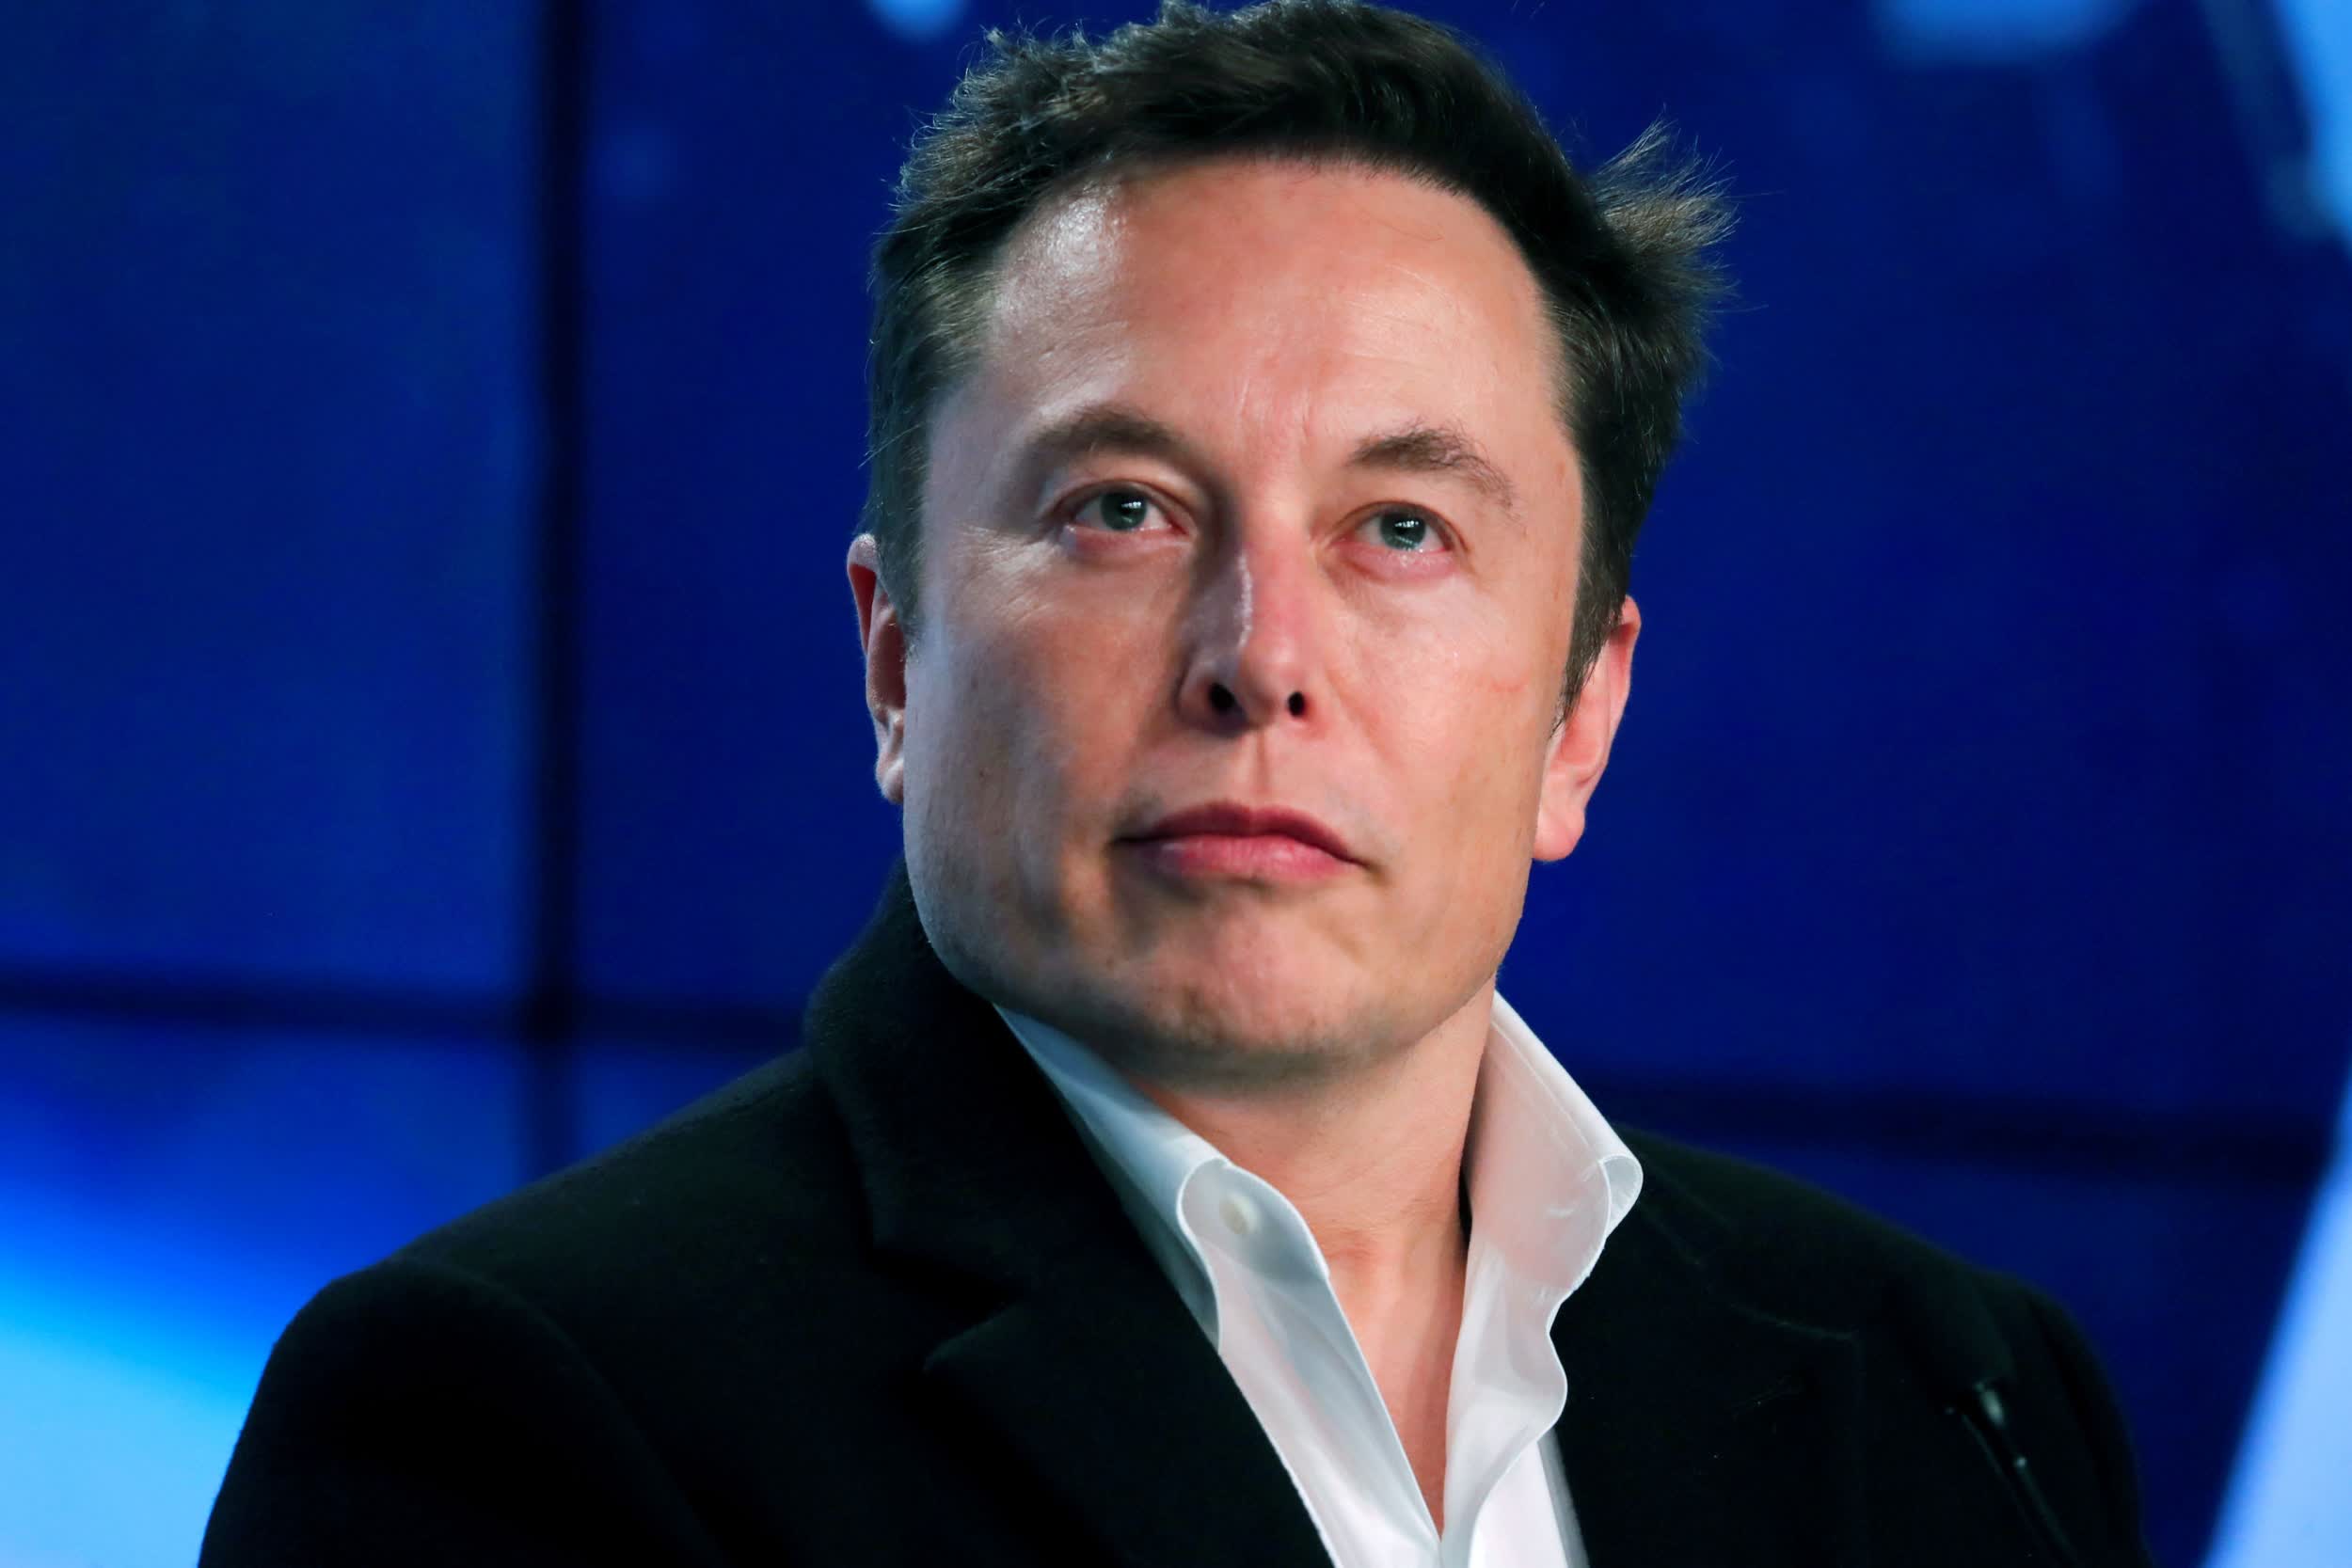 Elon Musk criticised for tweet comparing Canadian prime minister Justin Trudeau to Hitler